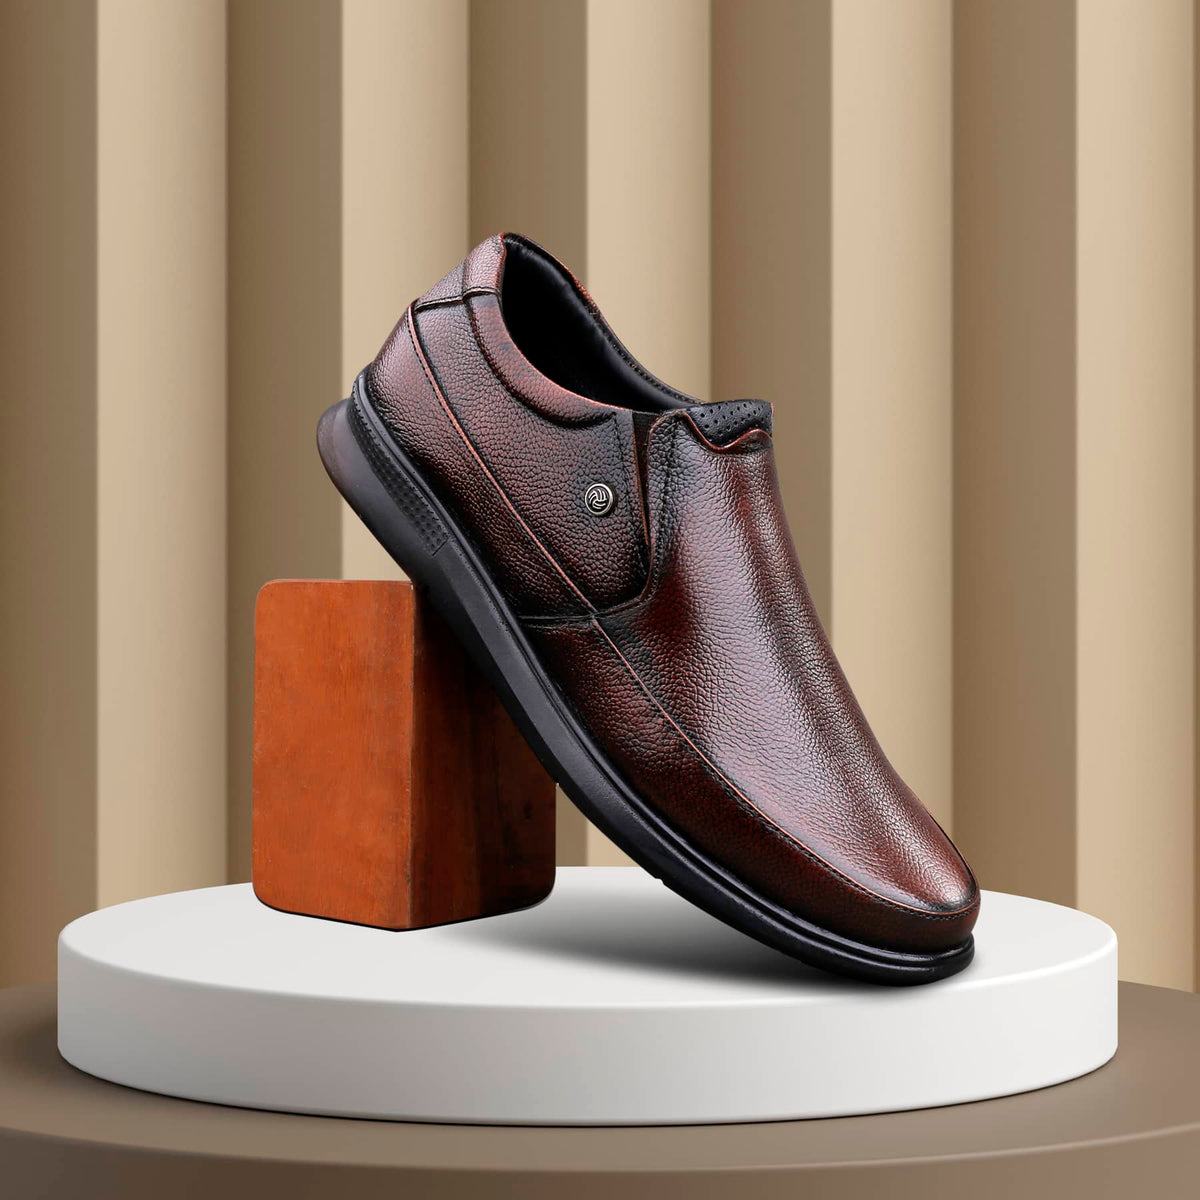 How To Make Men's Dress Shoes More Comfortable - Tread Labs